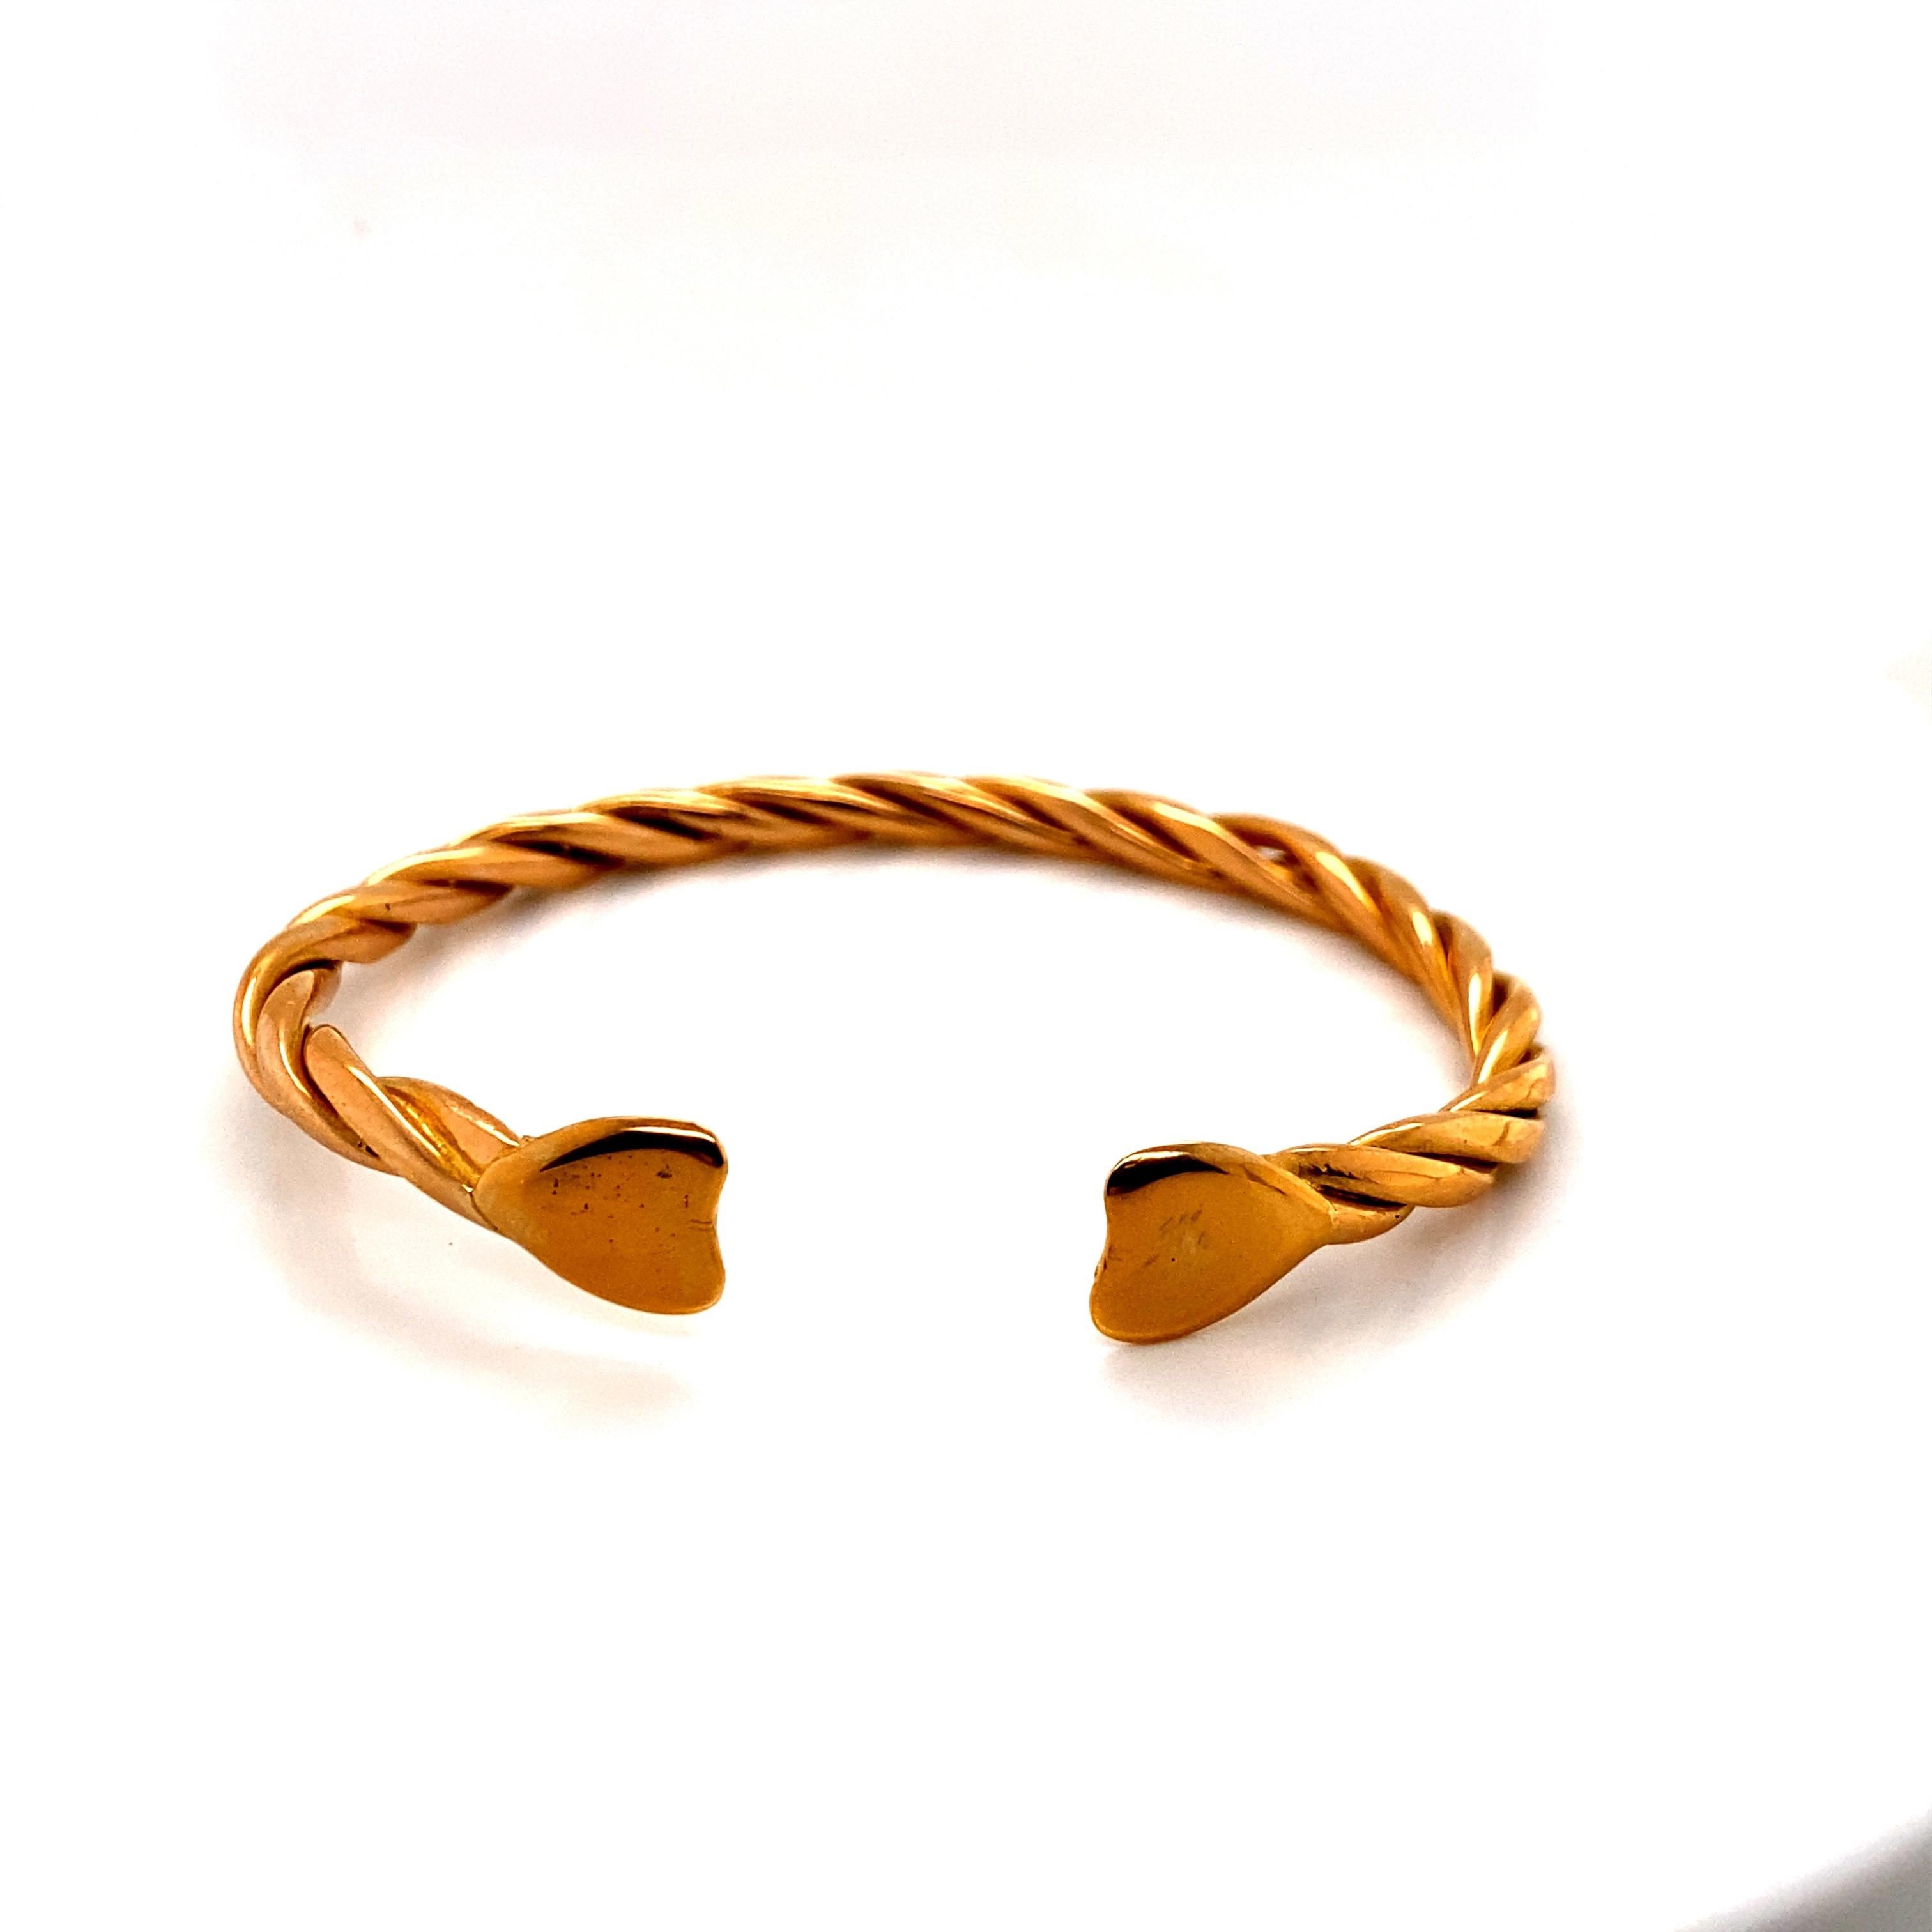 20K Yellow Gold Twist Cable Cuff Bangle Bracelet For Sale 1